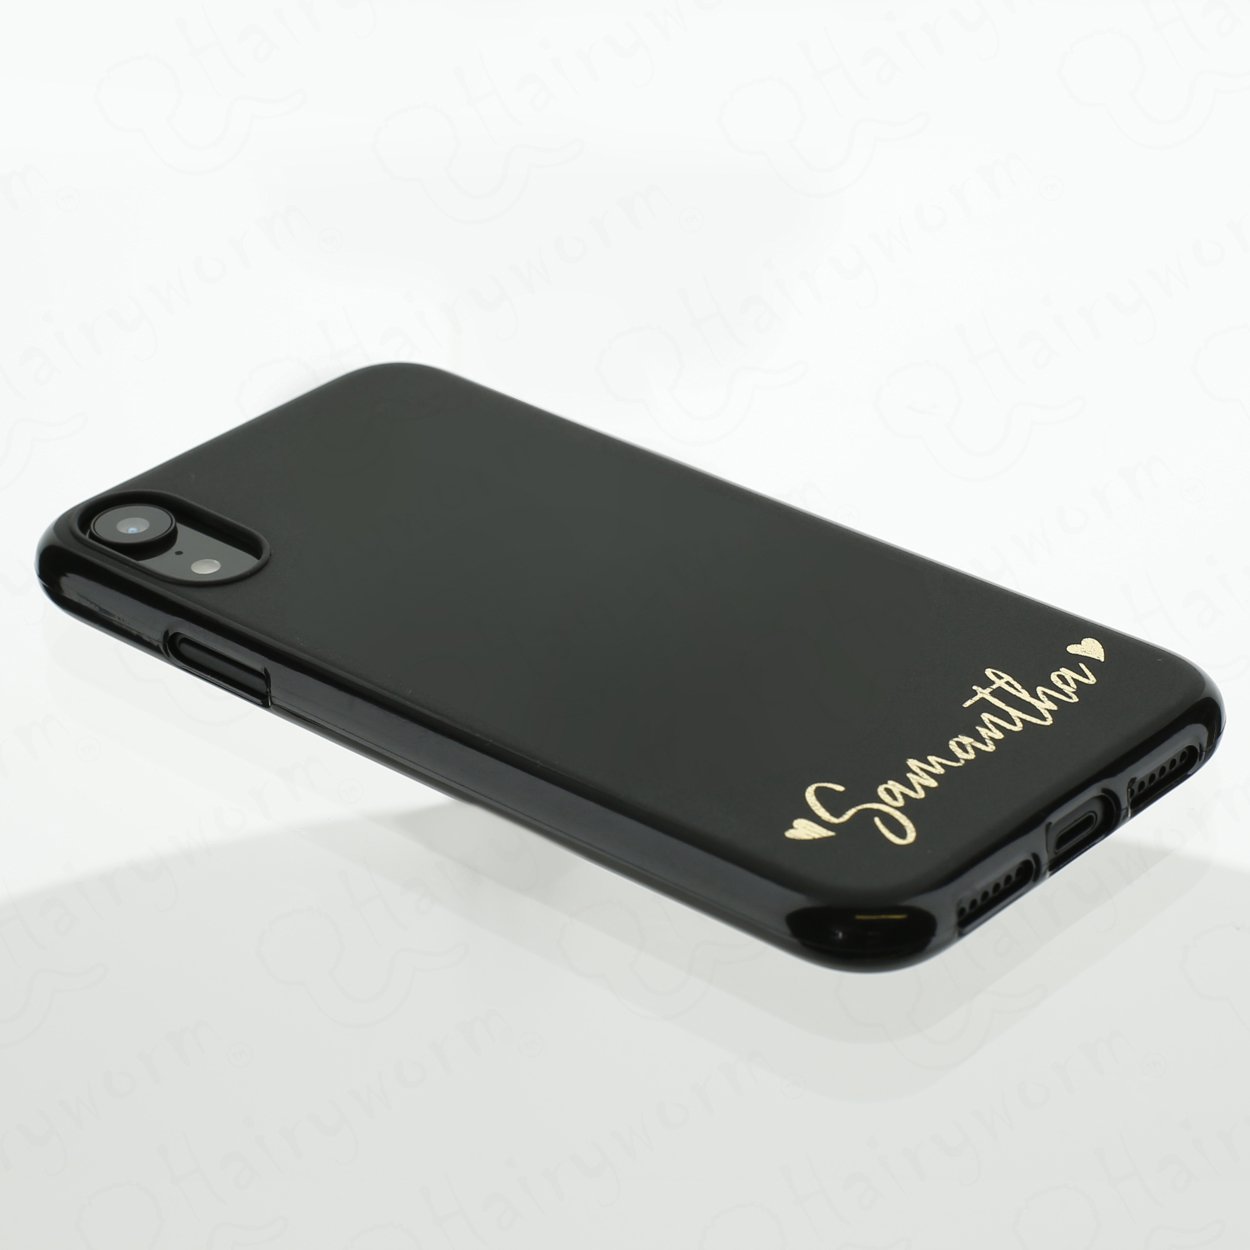 Personalised Google Phone Gel Case with Red Heart Accented Text